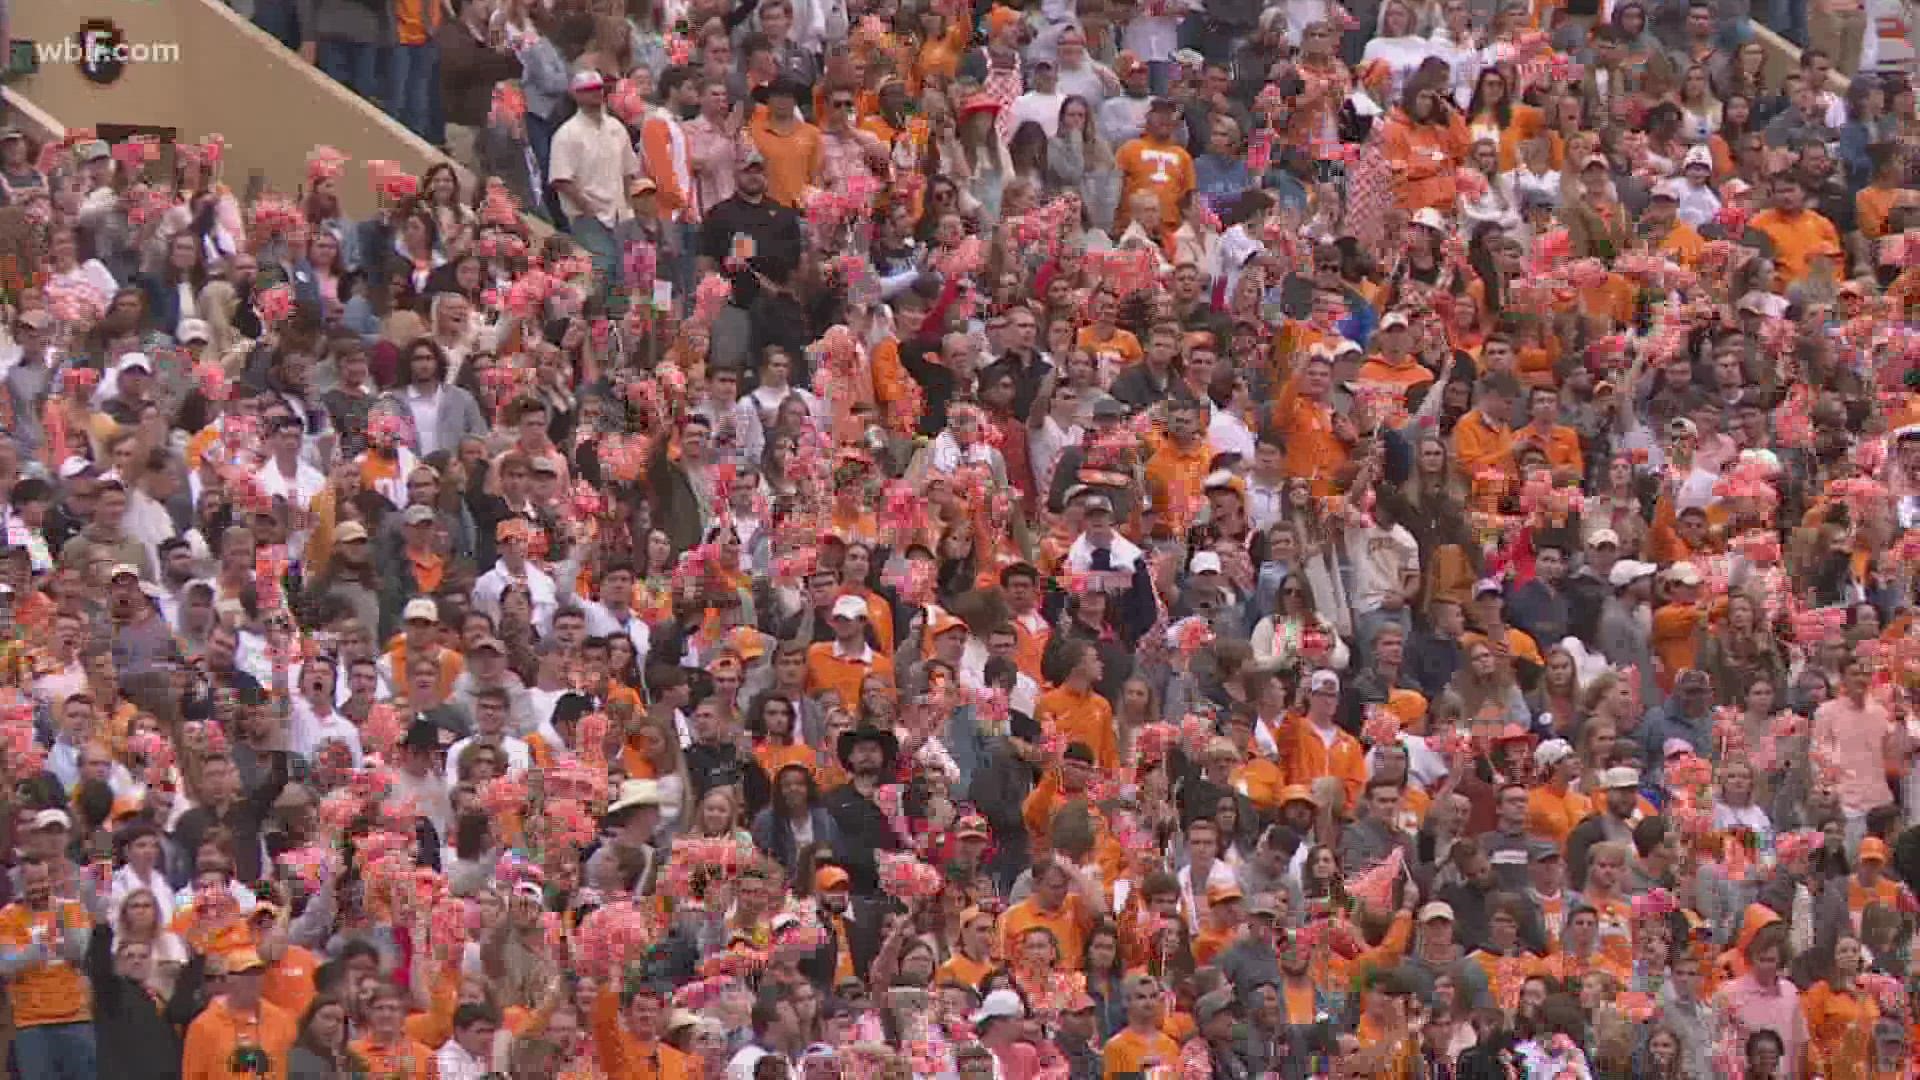 Business owners said they expect more people to come through their doors on game day, as the Vols face Georgia for their homecoming game.